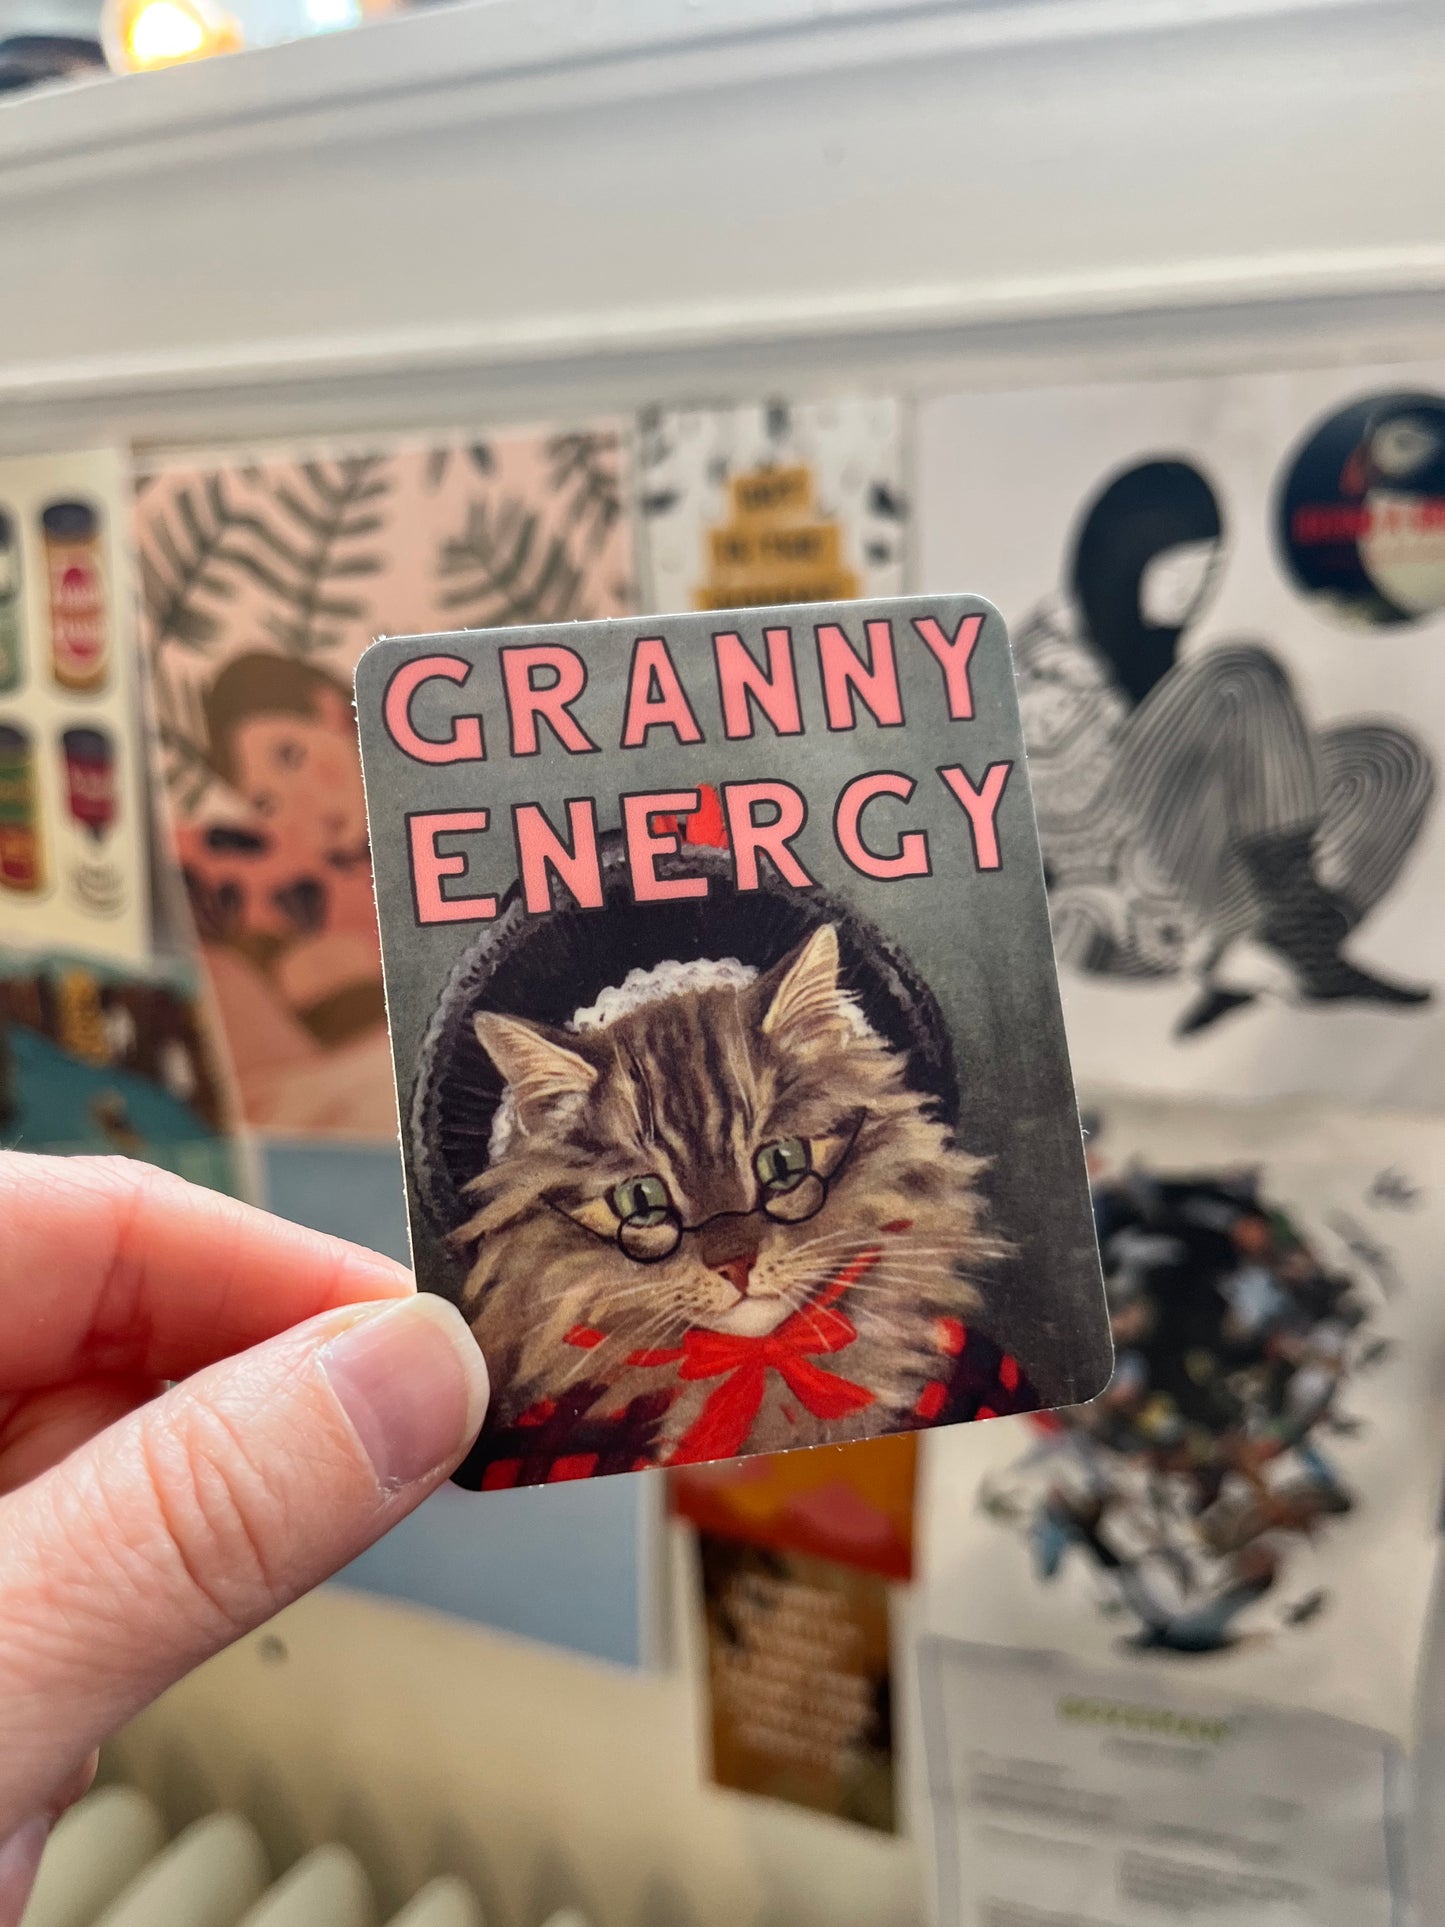 high quality vinyl sticker rectangle text granny energy with vintage cat wearing hat glasses bow sweater kitty tabby kitten grandma grandpa old lady sewing gardening cooking homesteading sustainable living canning pickling plants crafting home improvements coin laundry montana